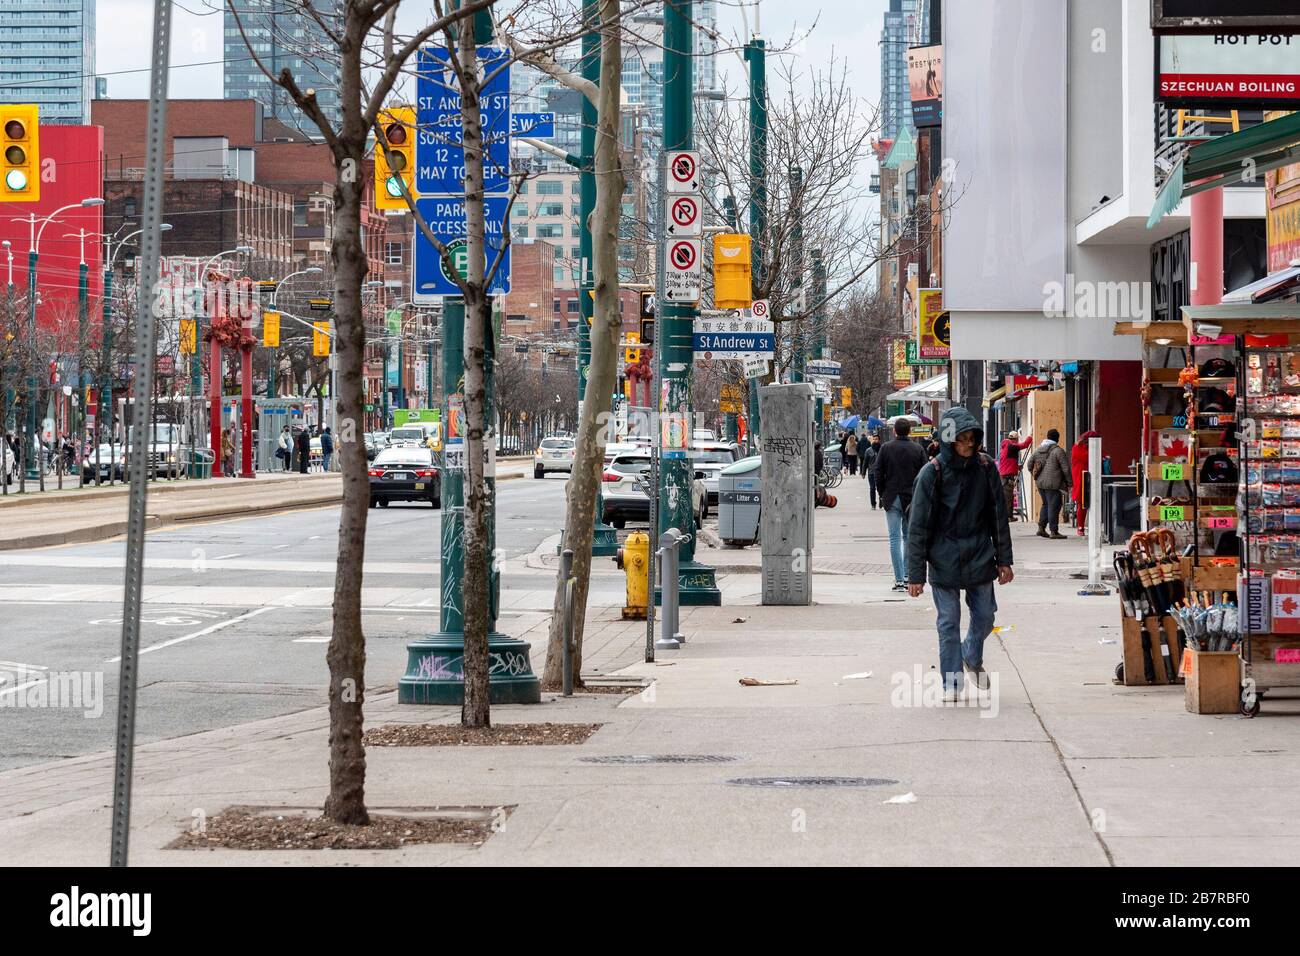 Toronto, Canada. 17th March 2020. A normally busy Spadina Avenue in Toronto's Chinatown is largely empty due to many closures related to COVID-19 preventative measures in Toronto.  Dominic Chan/EXImages Stock Photo